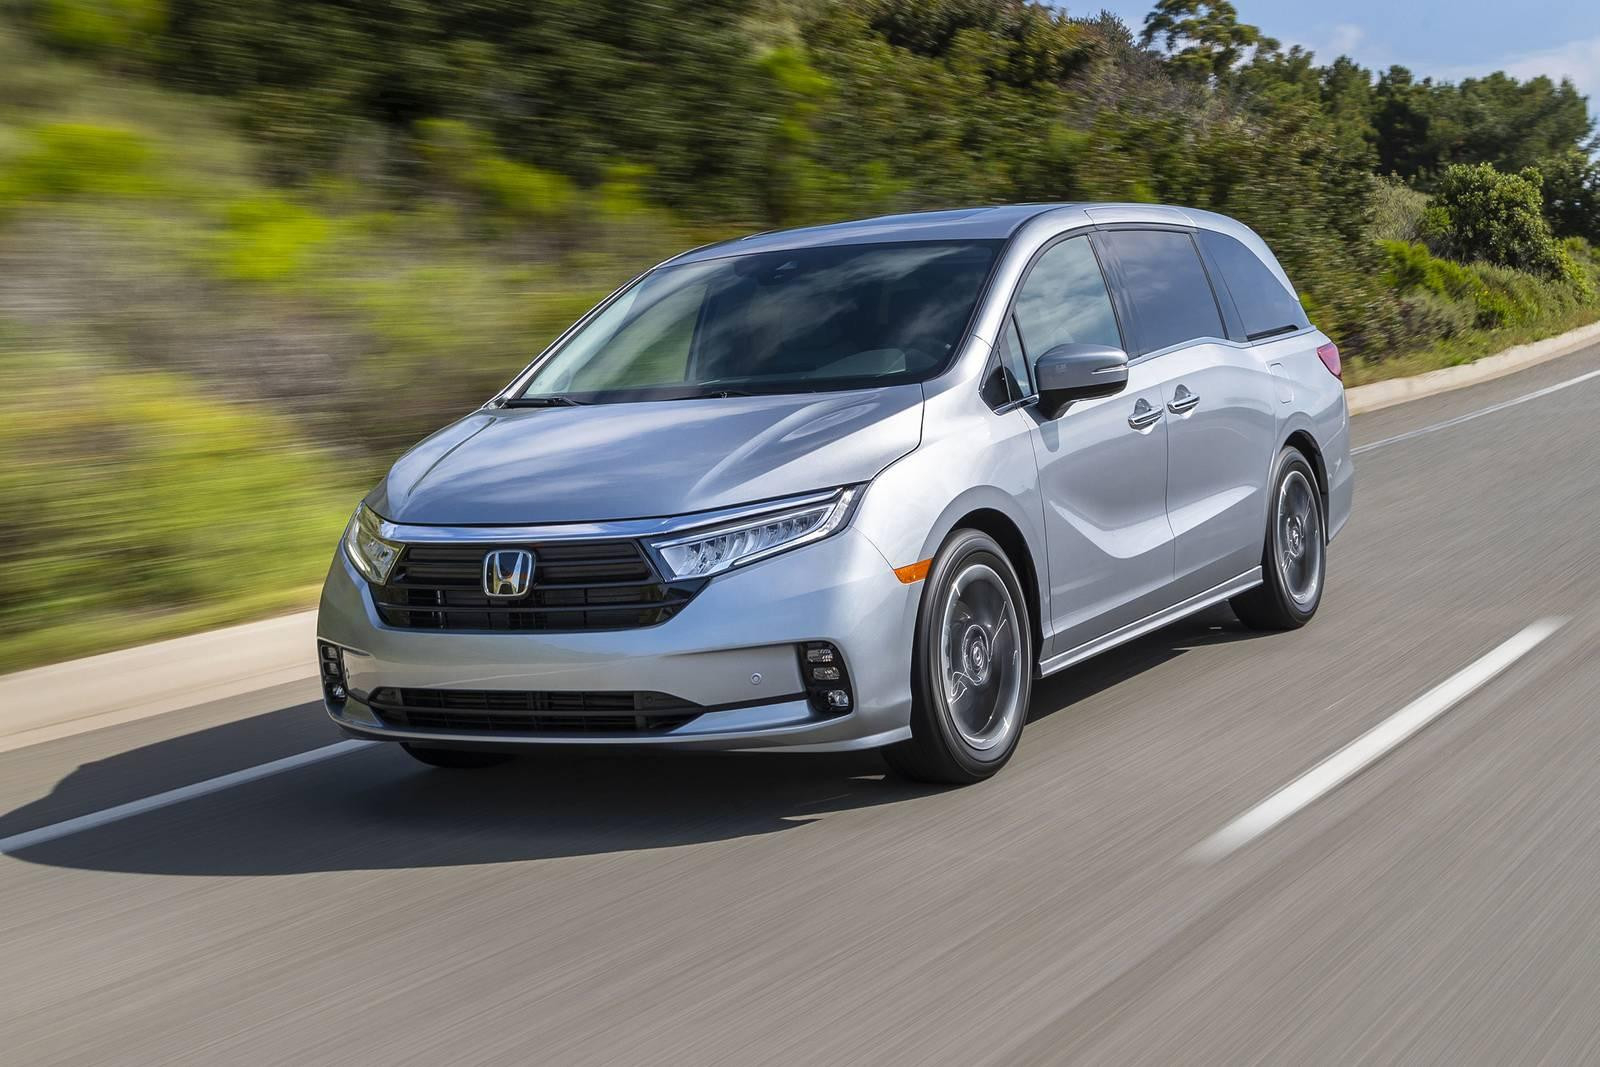 2023 Honda Odyssey 0 60 Specs and Review